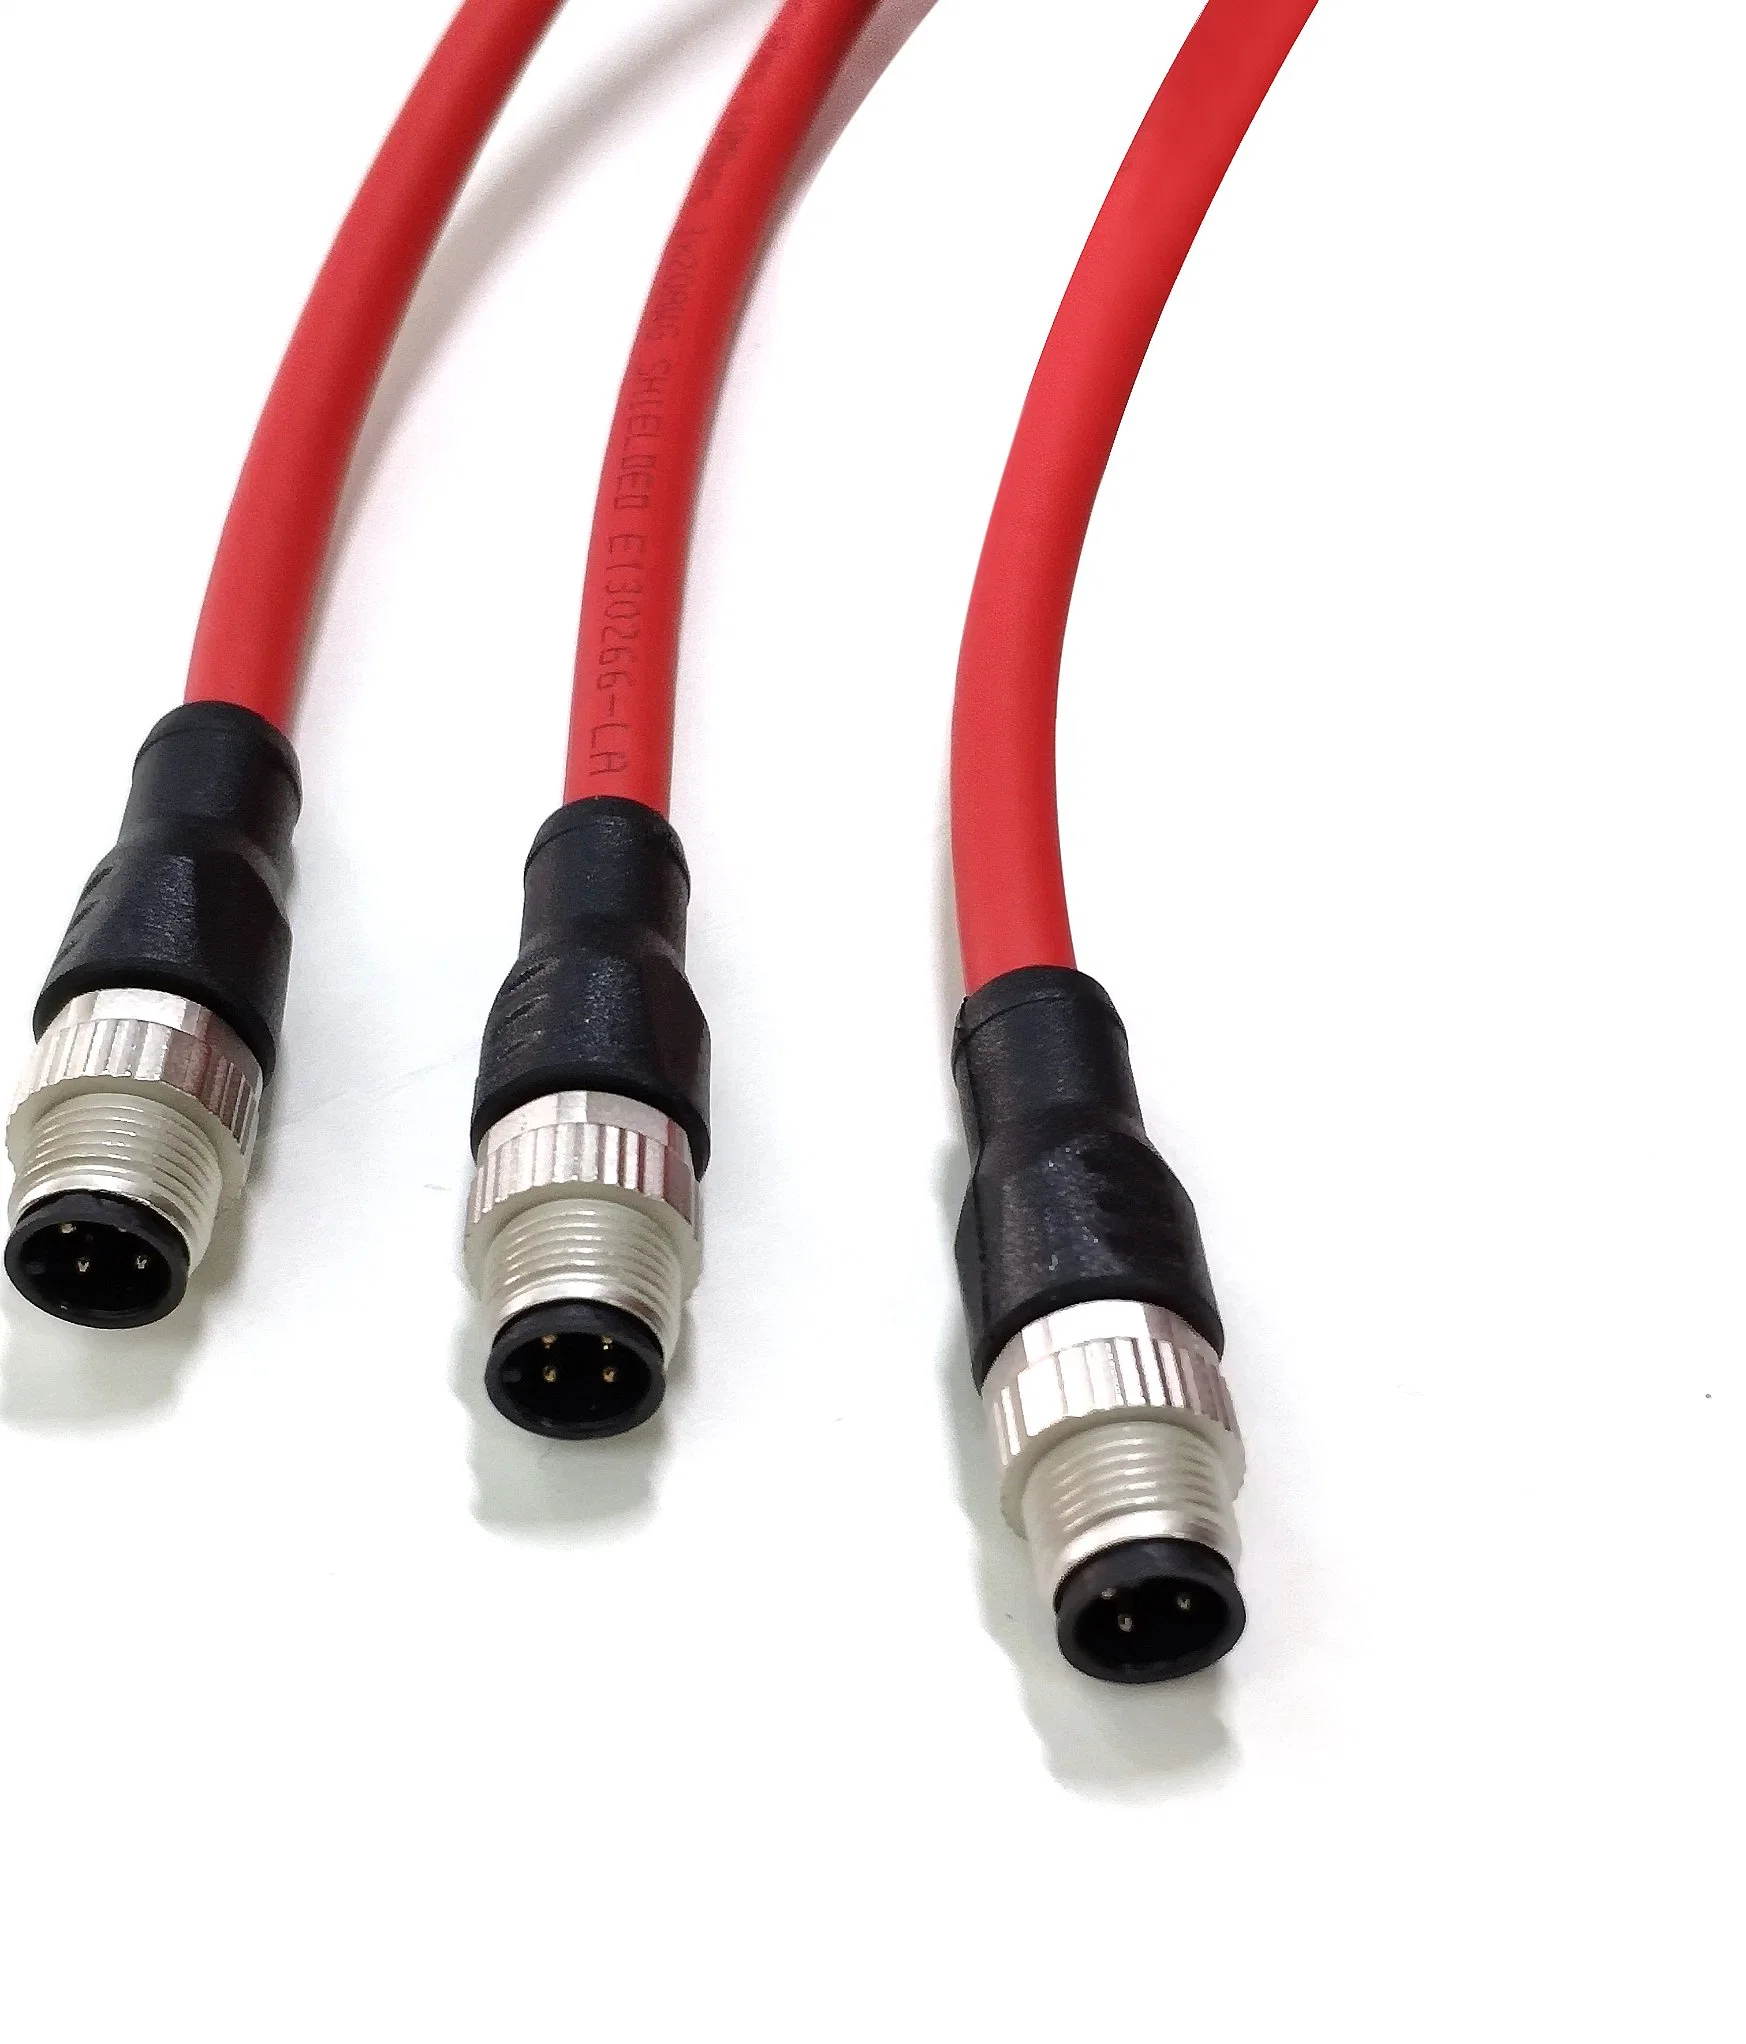 Fieldbus Cc-Link Shielded Acode M12 Plug Connectors with PVC Cable